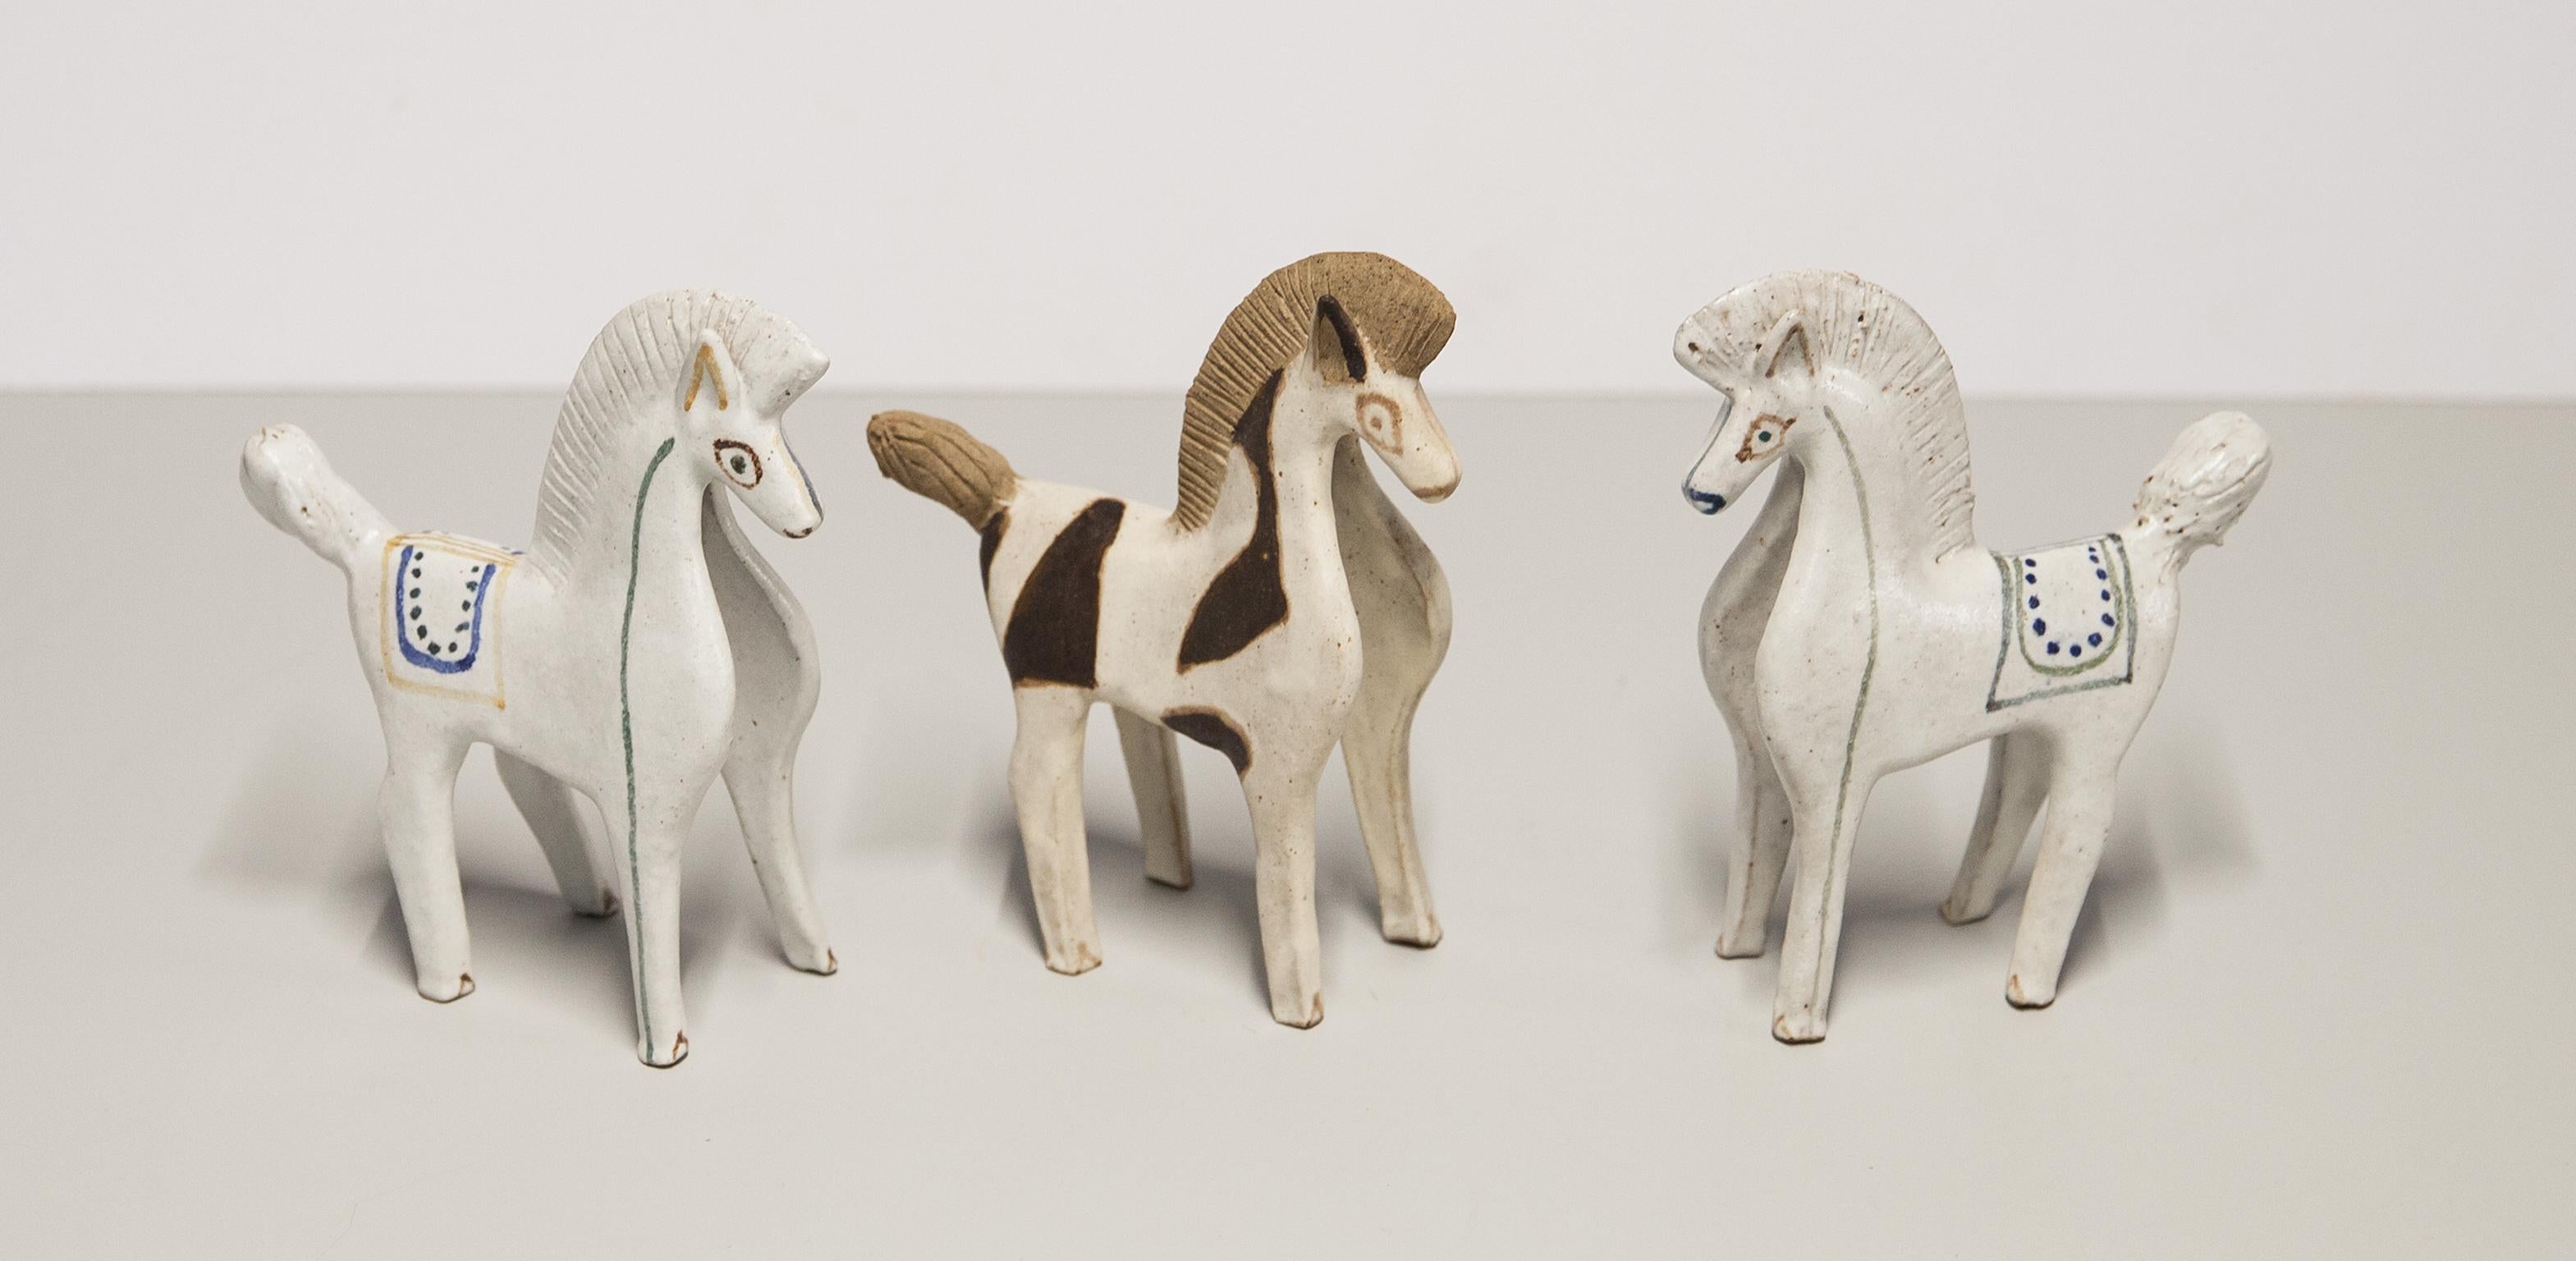 Cream white glazed ceramic horses made by Bruno Gambone in the 1970s, signed Gambone on the bottom. Wonderful set in excellent condition.